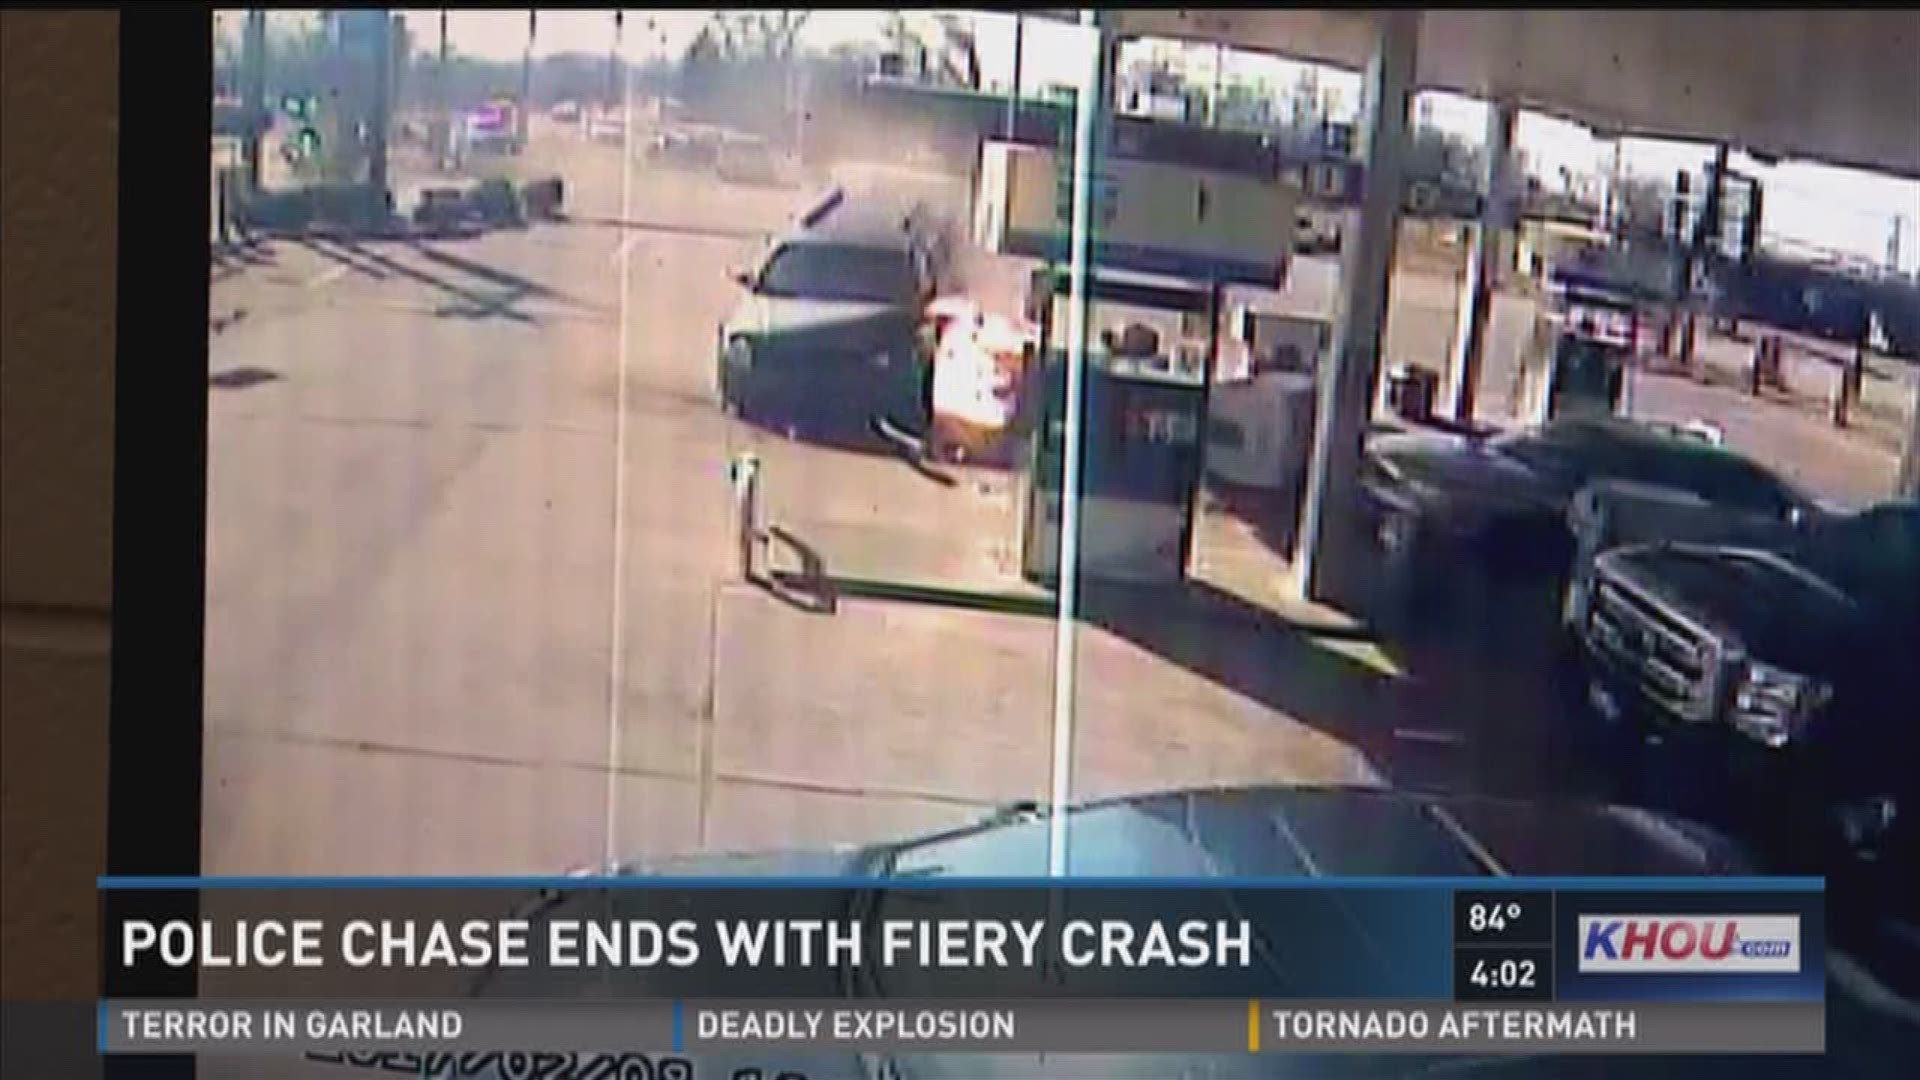 Firefighters battled big flames at a Chevron gas station in north Houston Wednesday after a chase ended in a fiery crash. As security cameras rolled, the SUV hopped a curve, hit a truck, crashed into a gas pump and burst into flames.